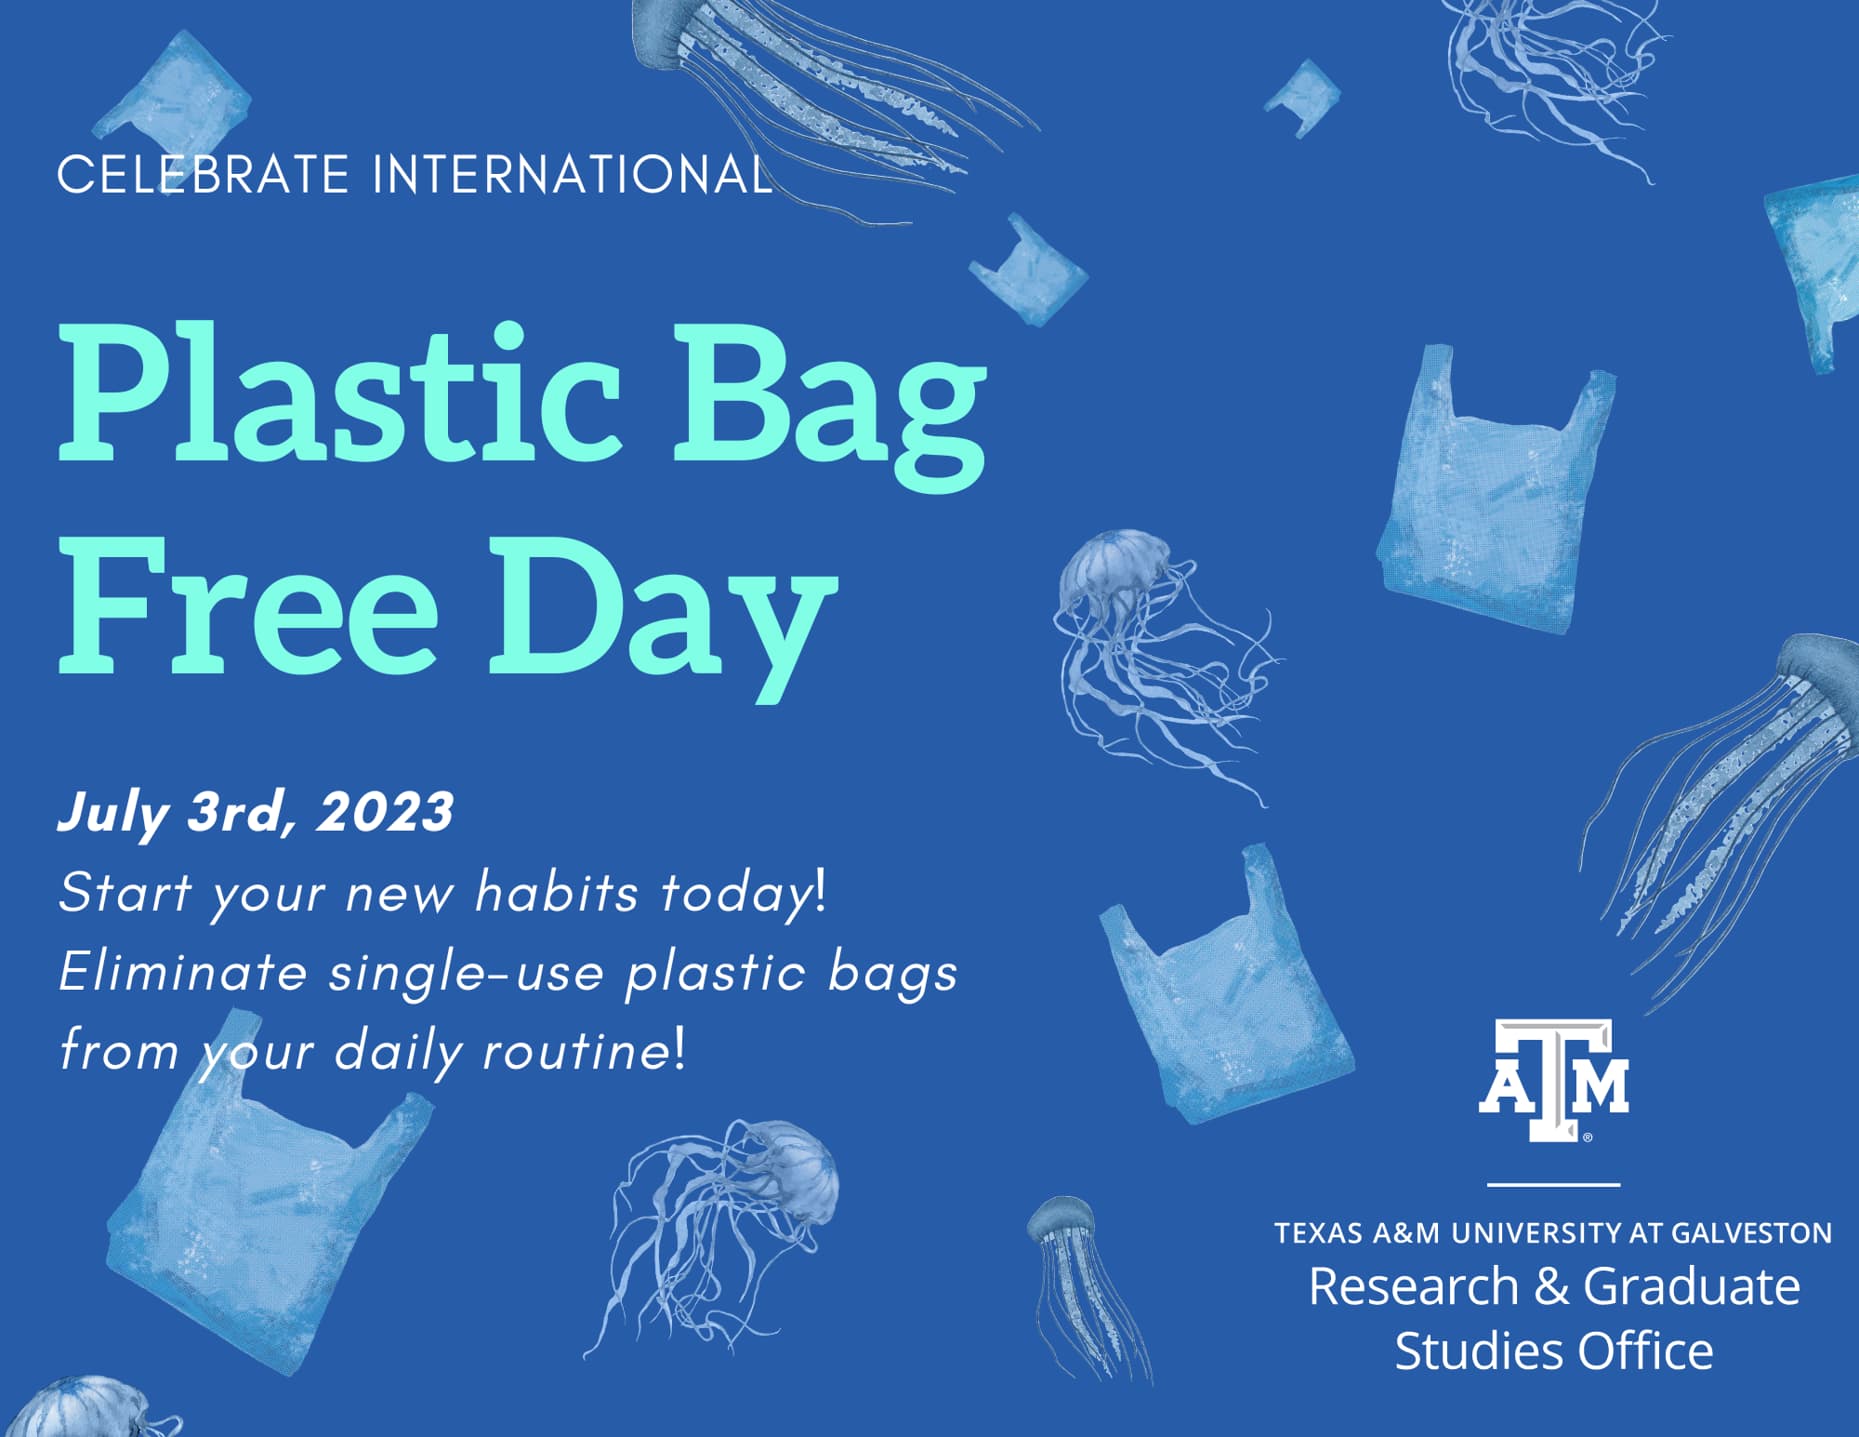 Plastic Bag Free Day infographic for July 3